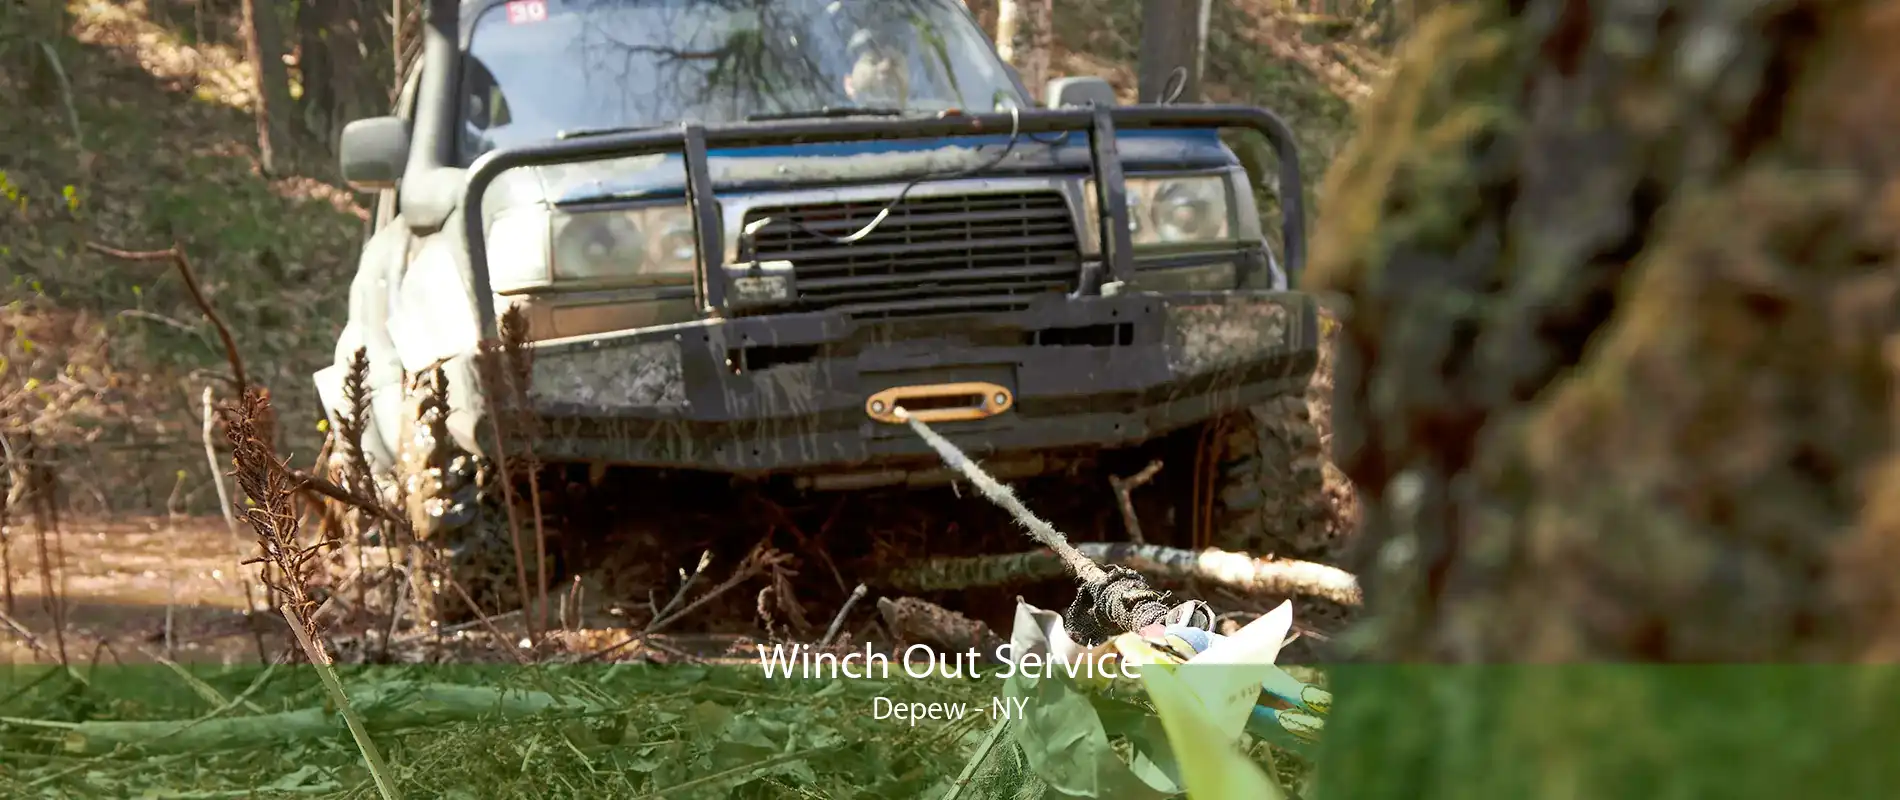 Winch Out Service Depew - NY